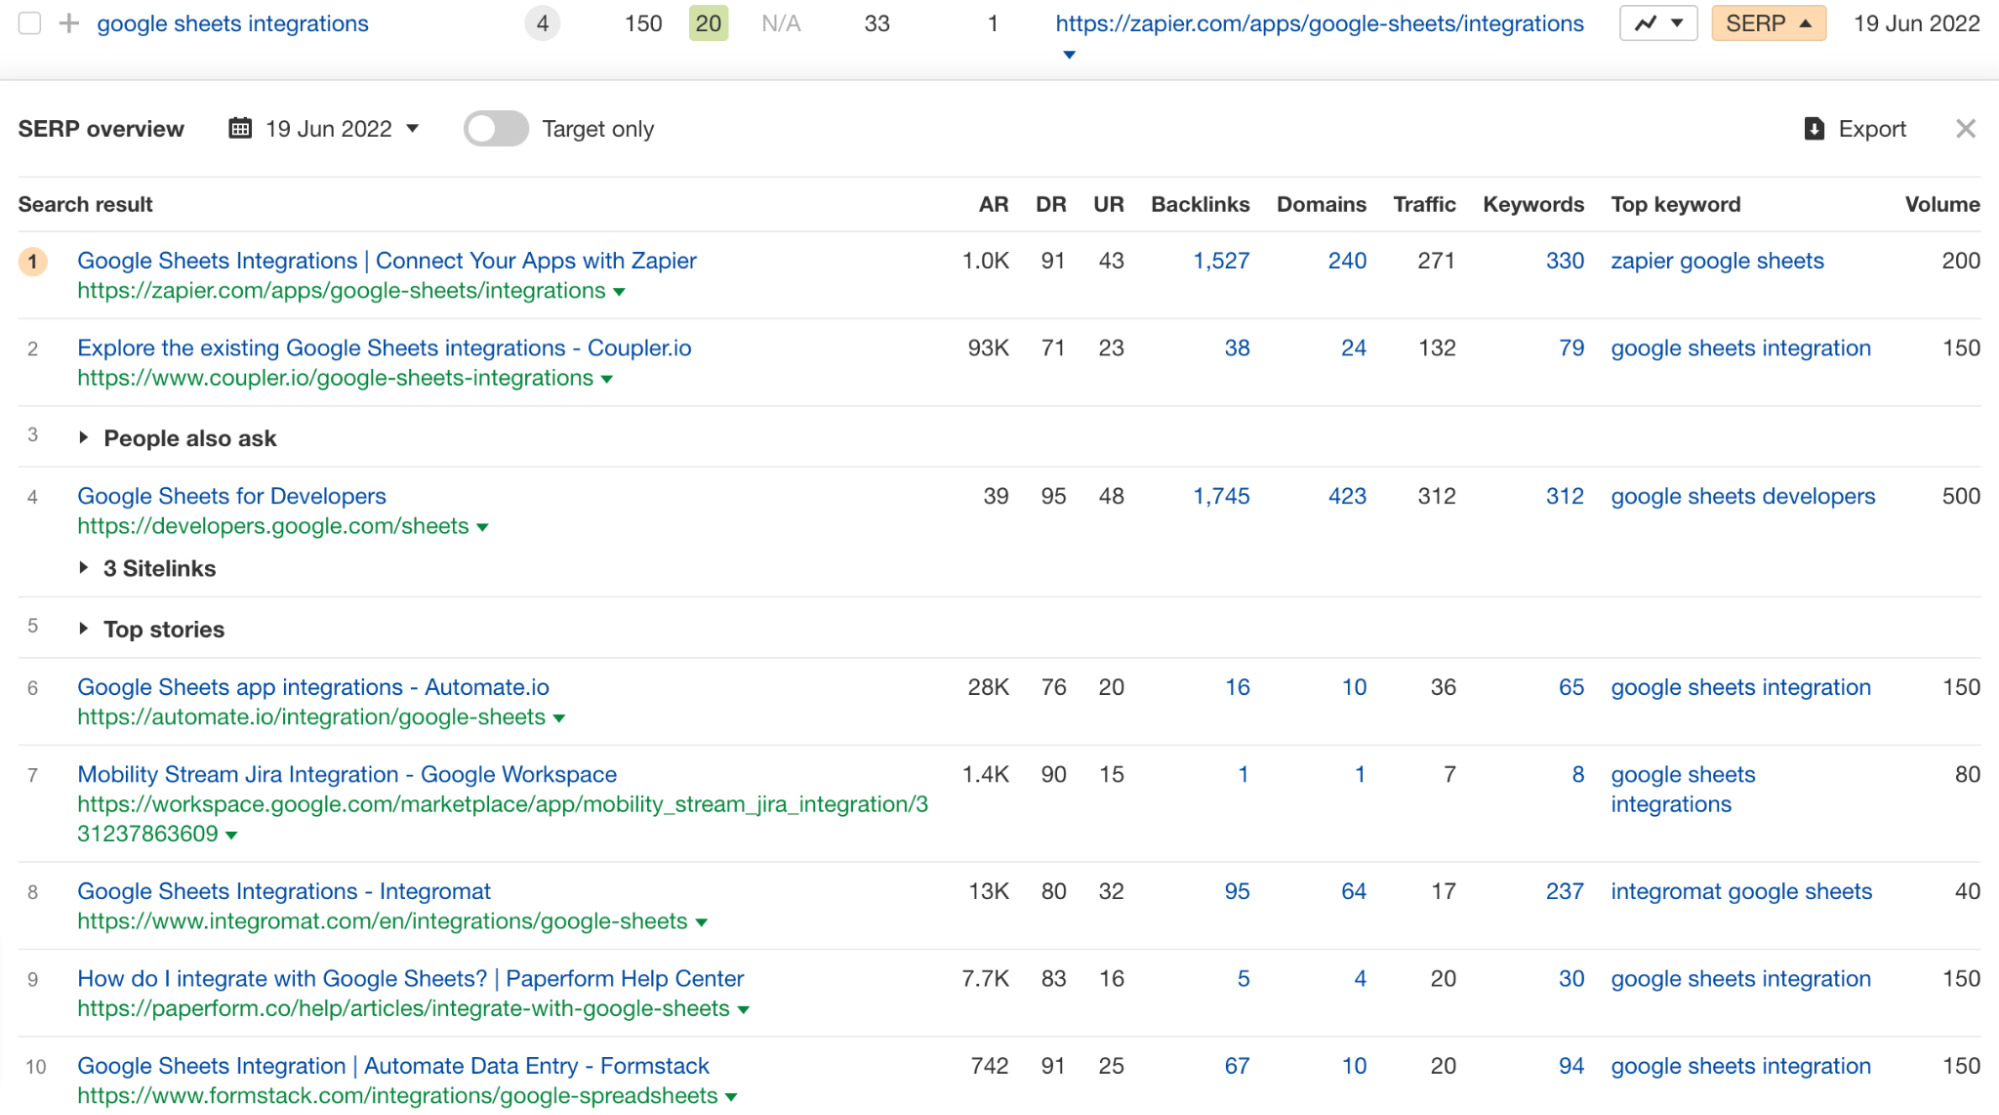 SERP for "google sheets integrations" with a clear dominating content type